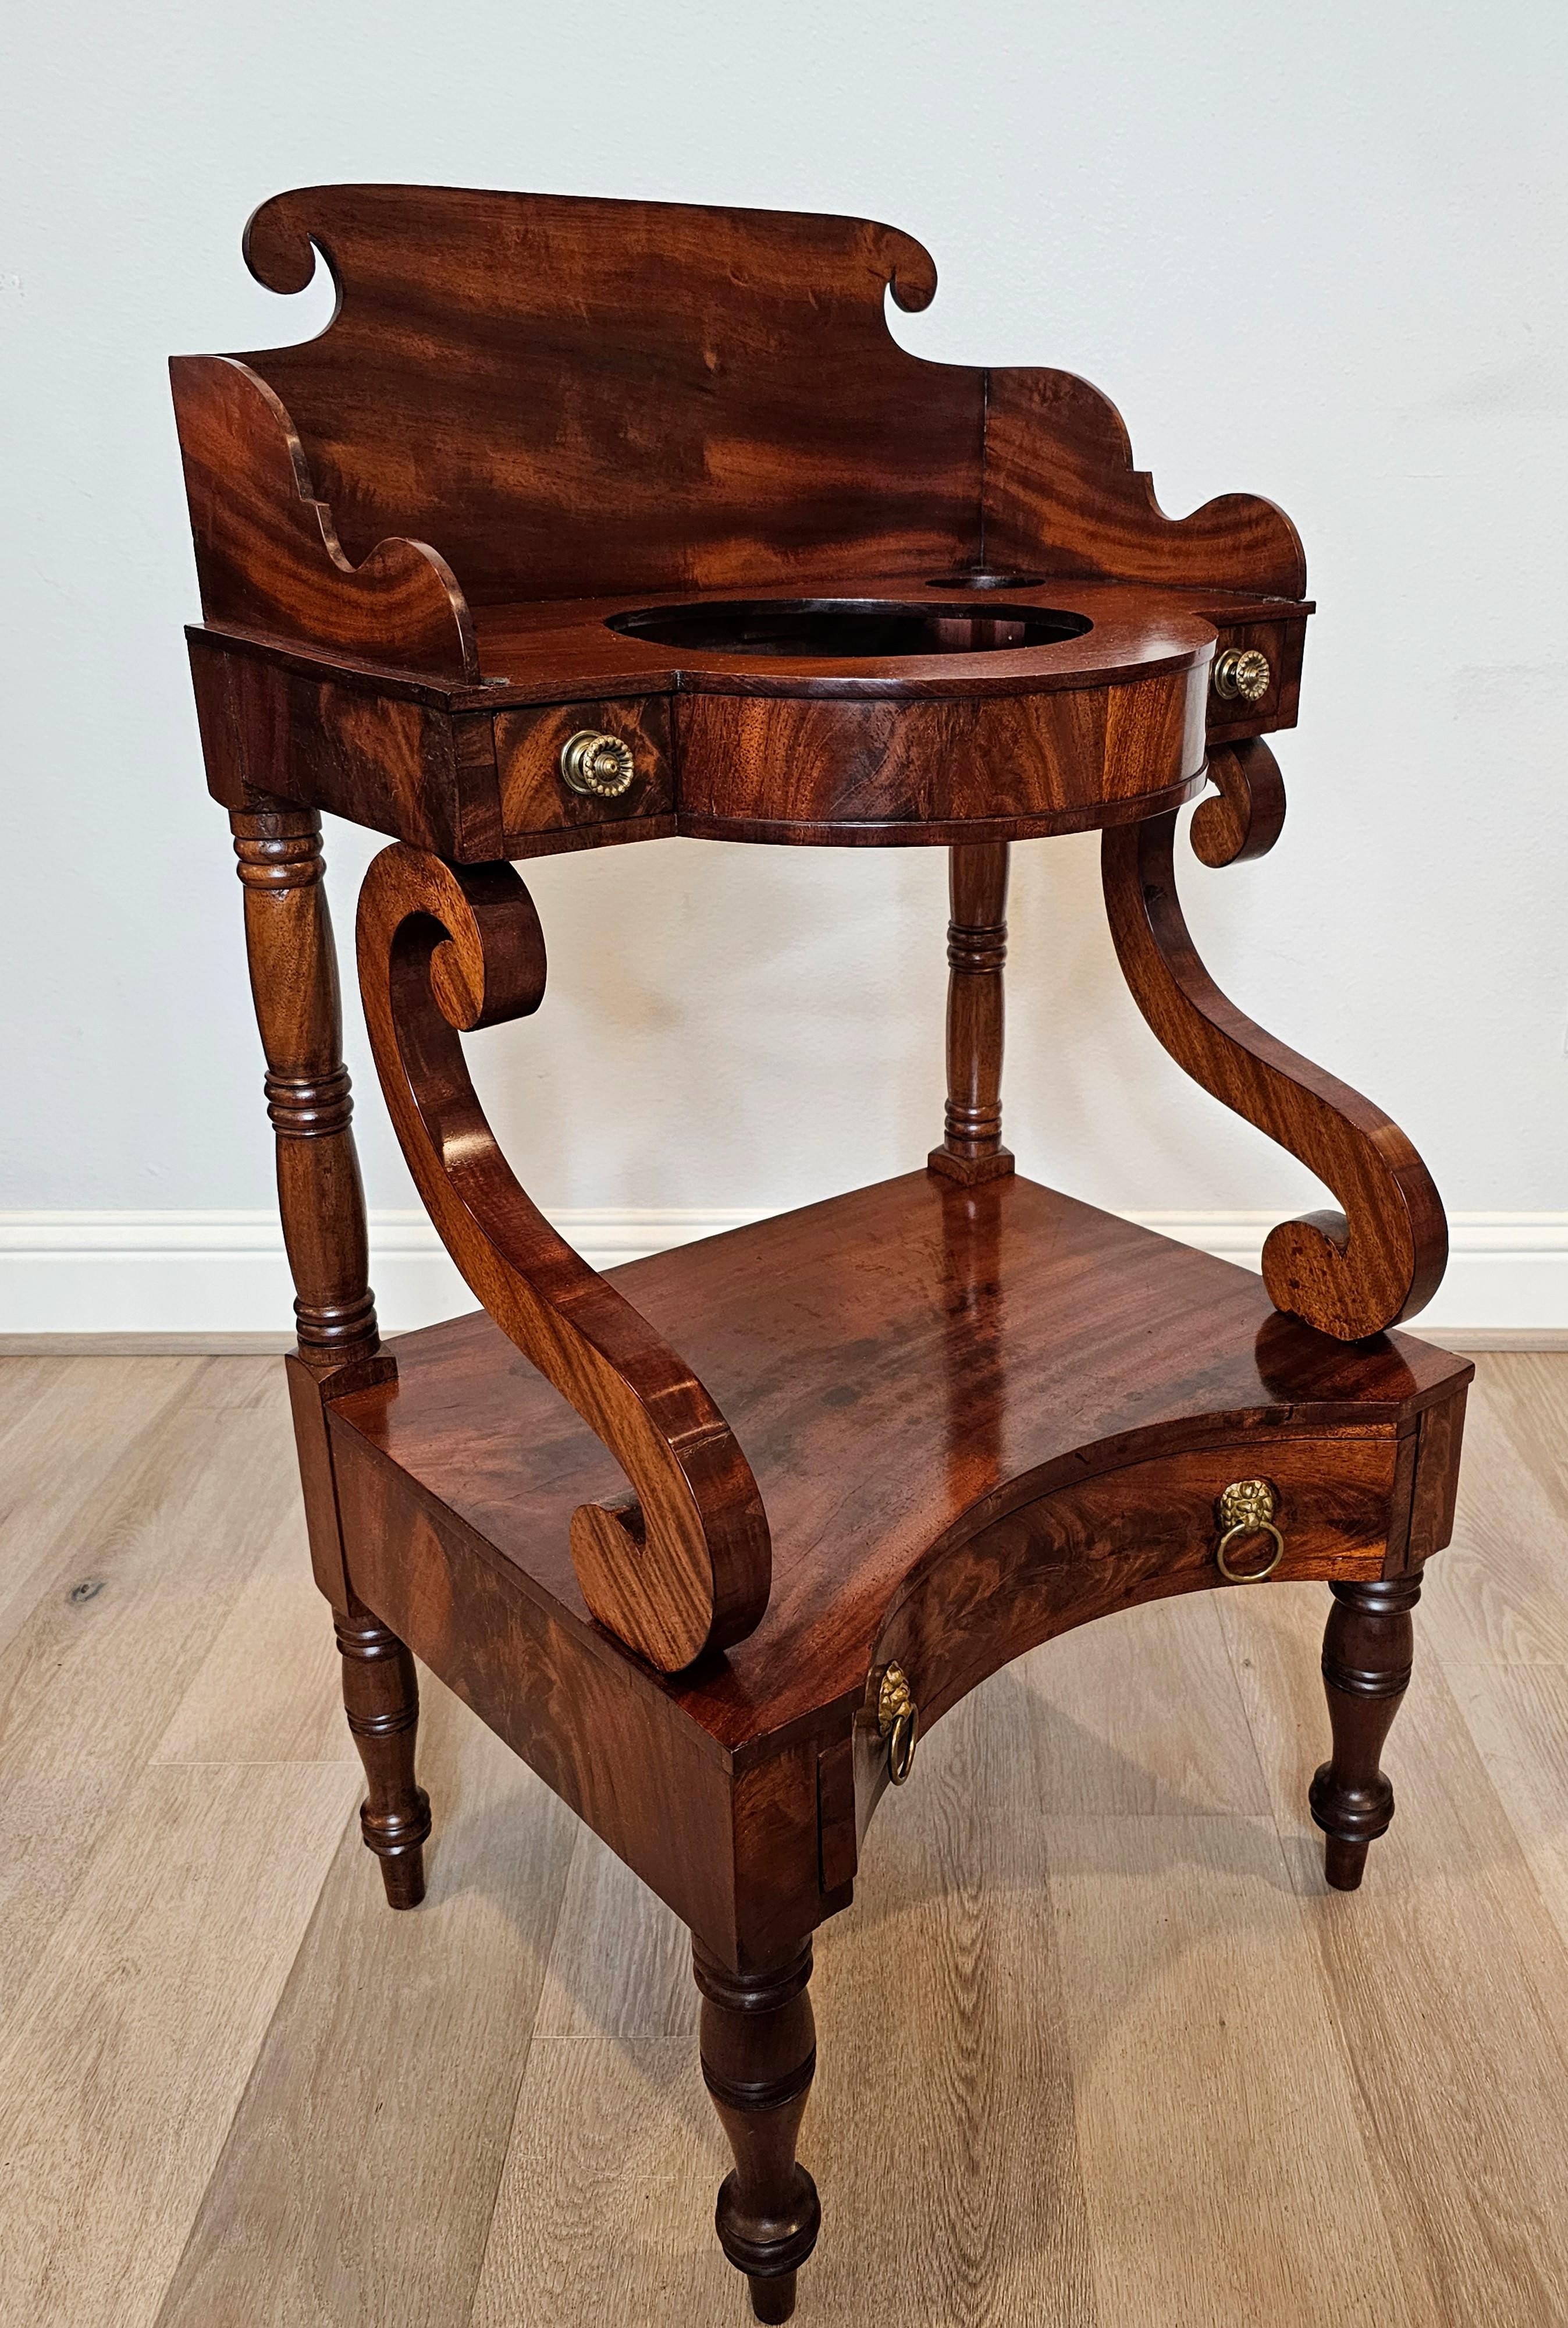 19th Century Early American Federal Period Flame Mahogany Antique Wash Stand  For Sale